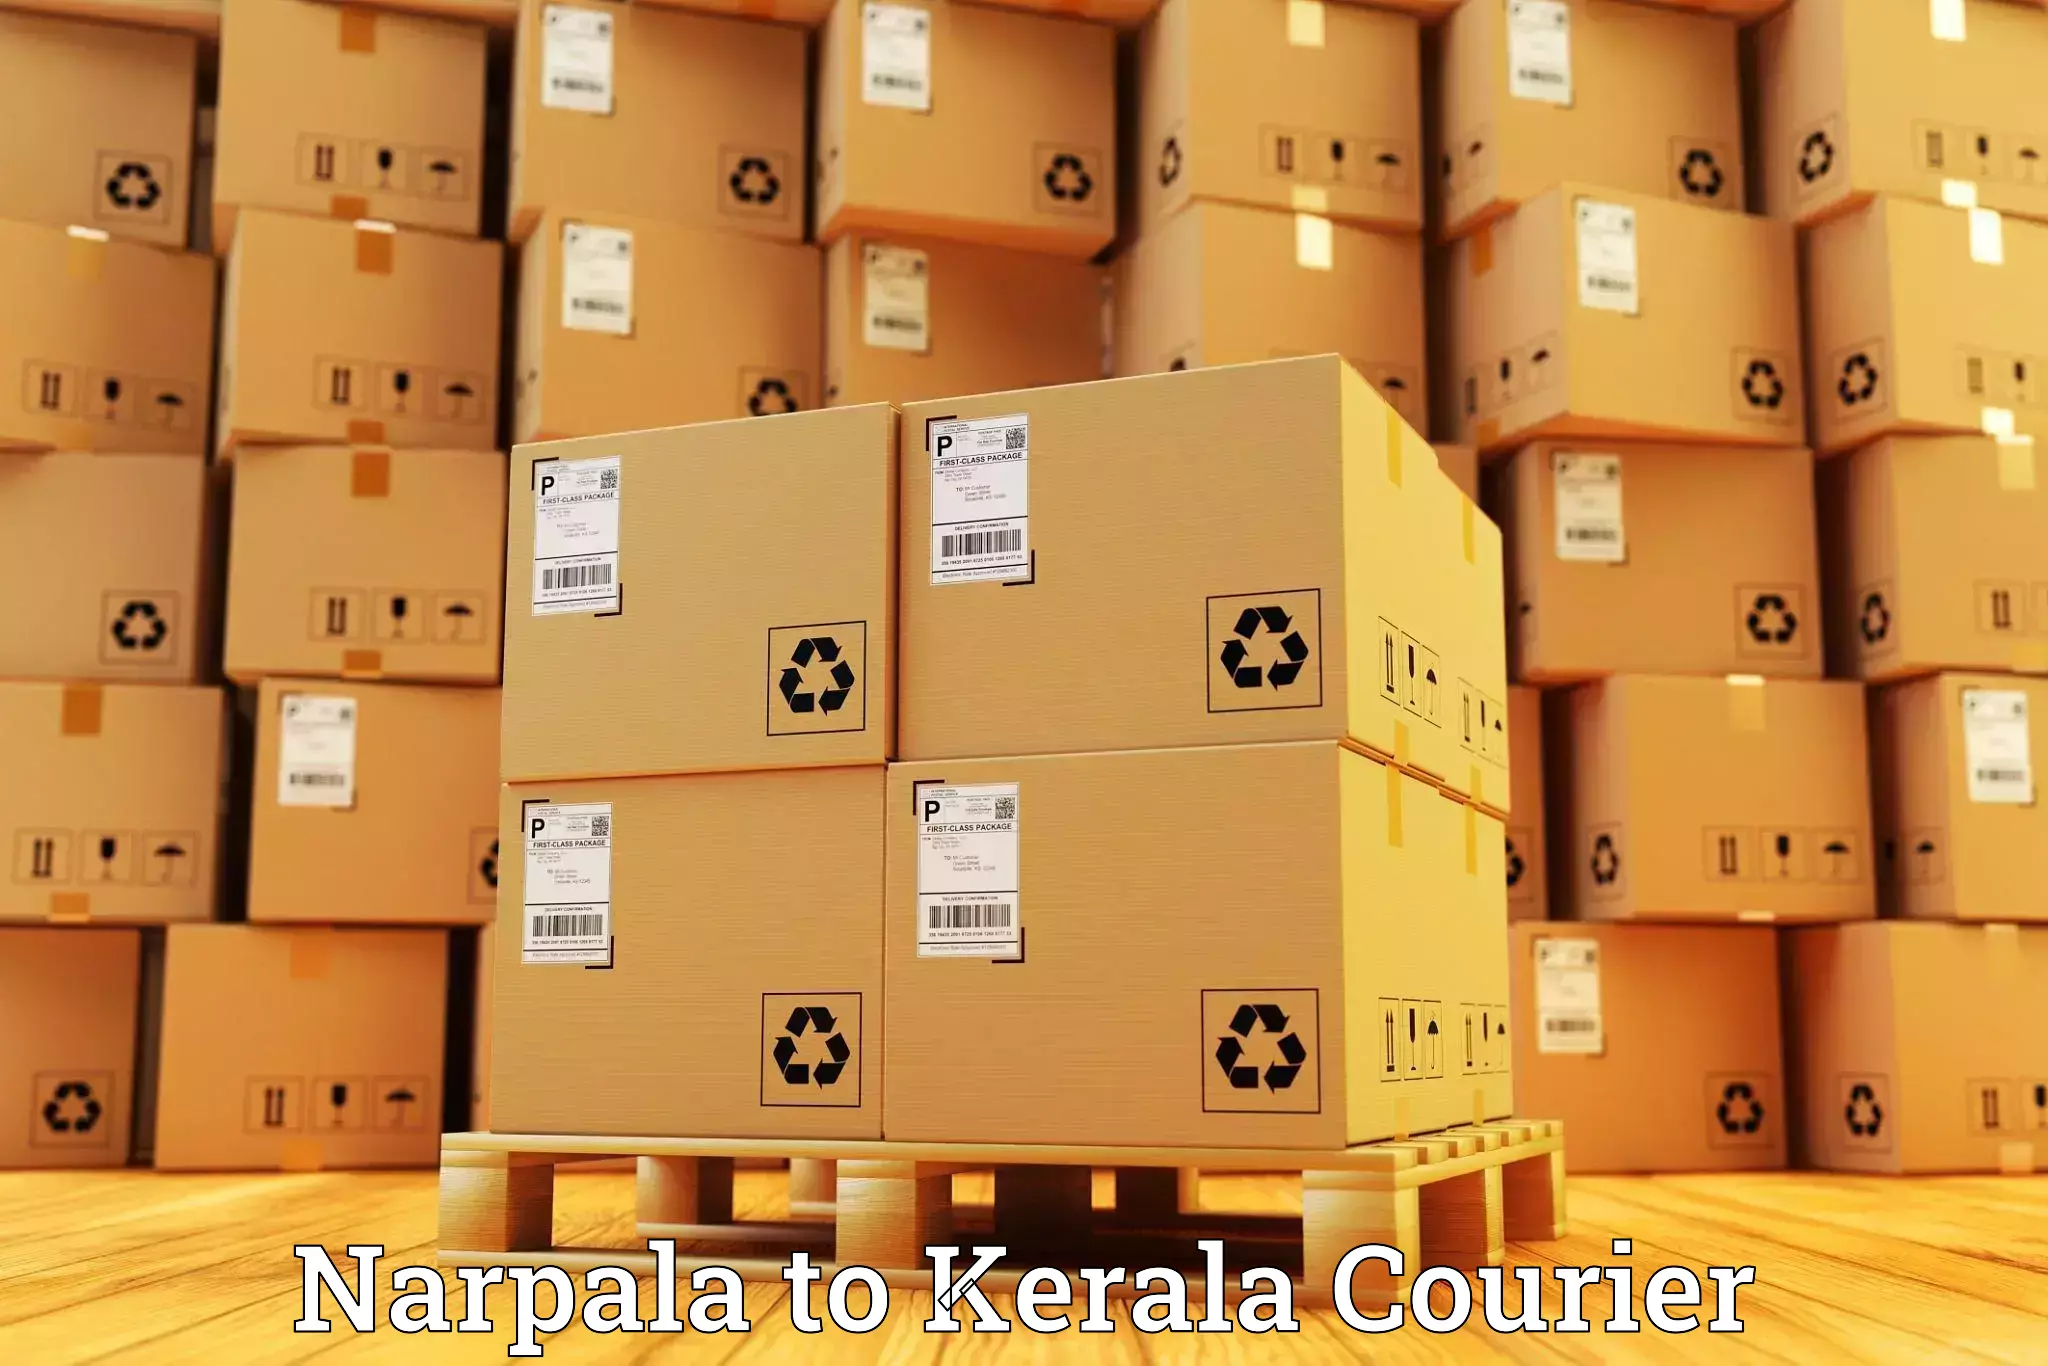 Courier service comparison in Narpala to Venjaramoodu